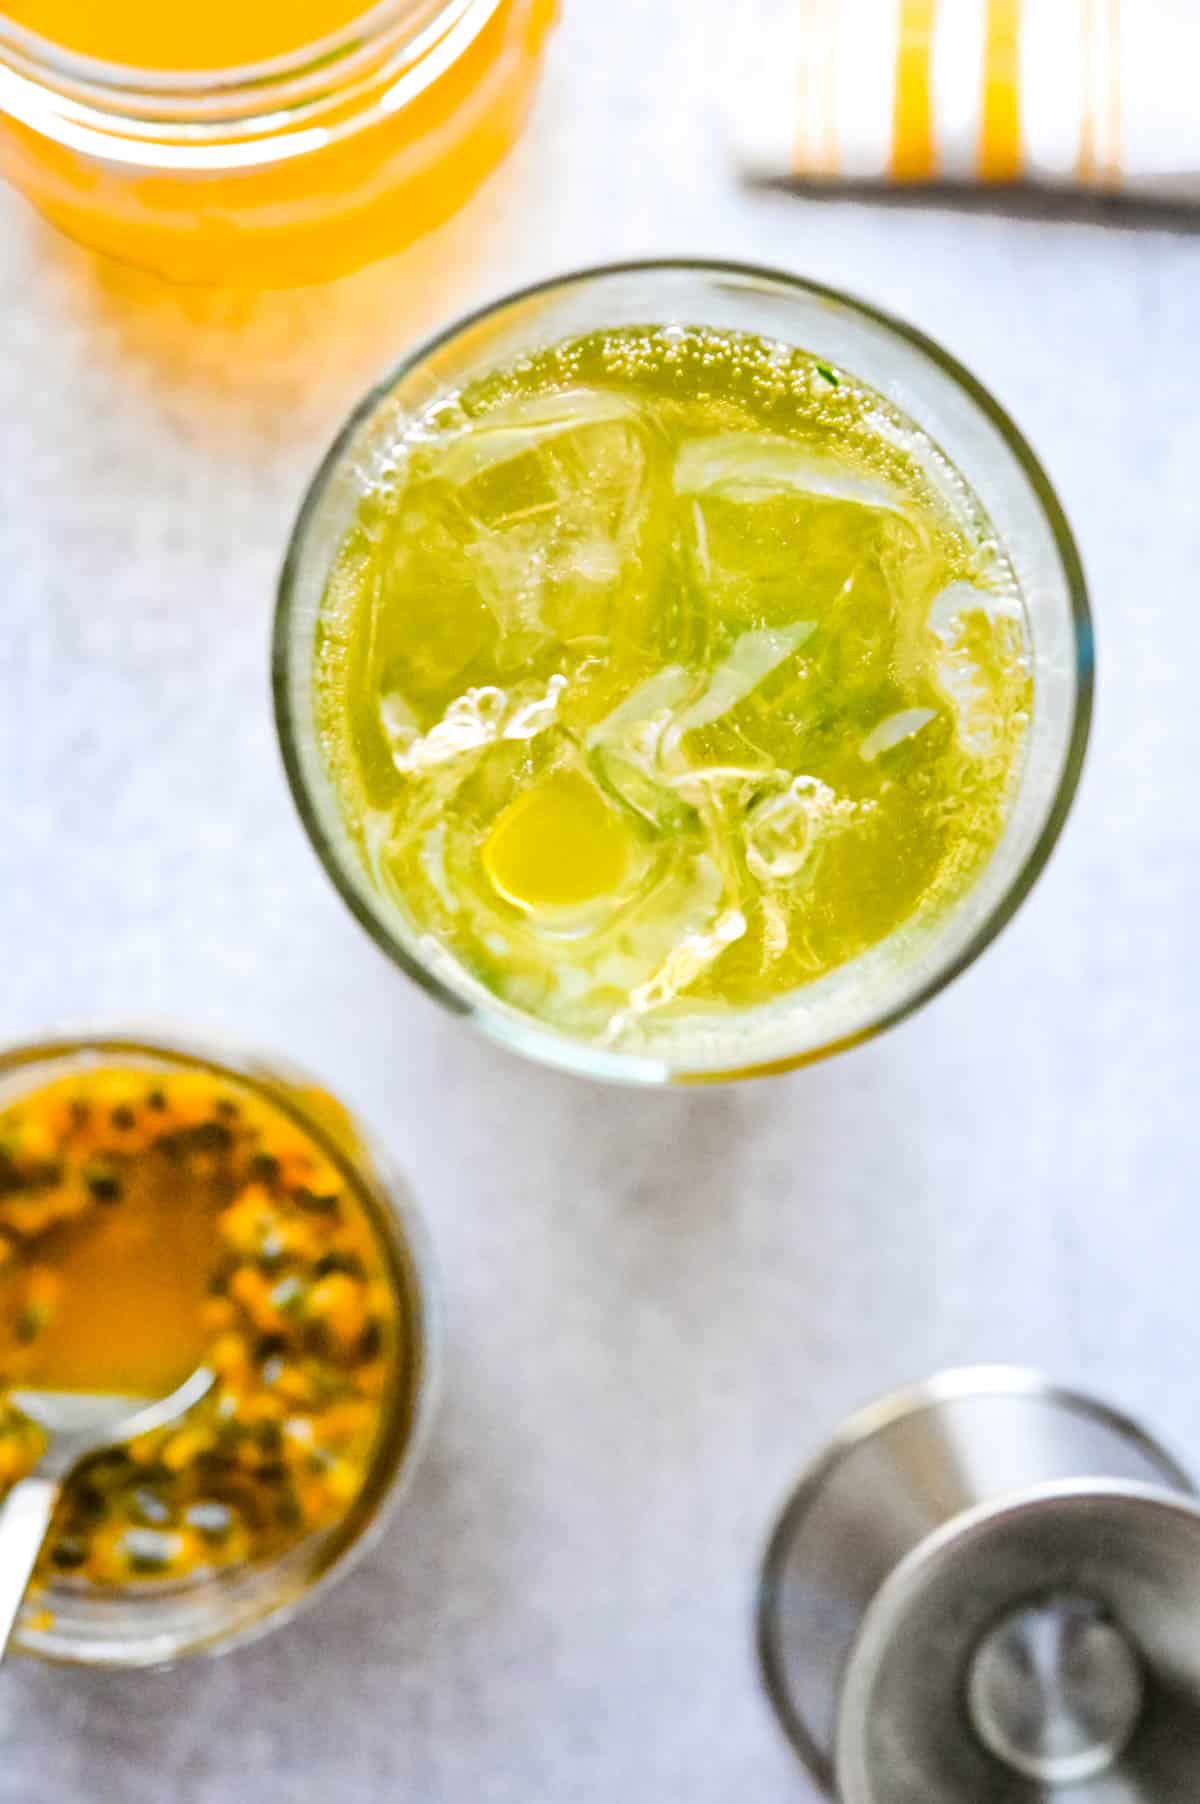 Adding sparkling water to the passion fruit mojito to give it bubbles.